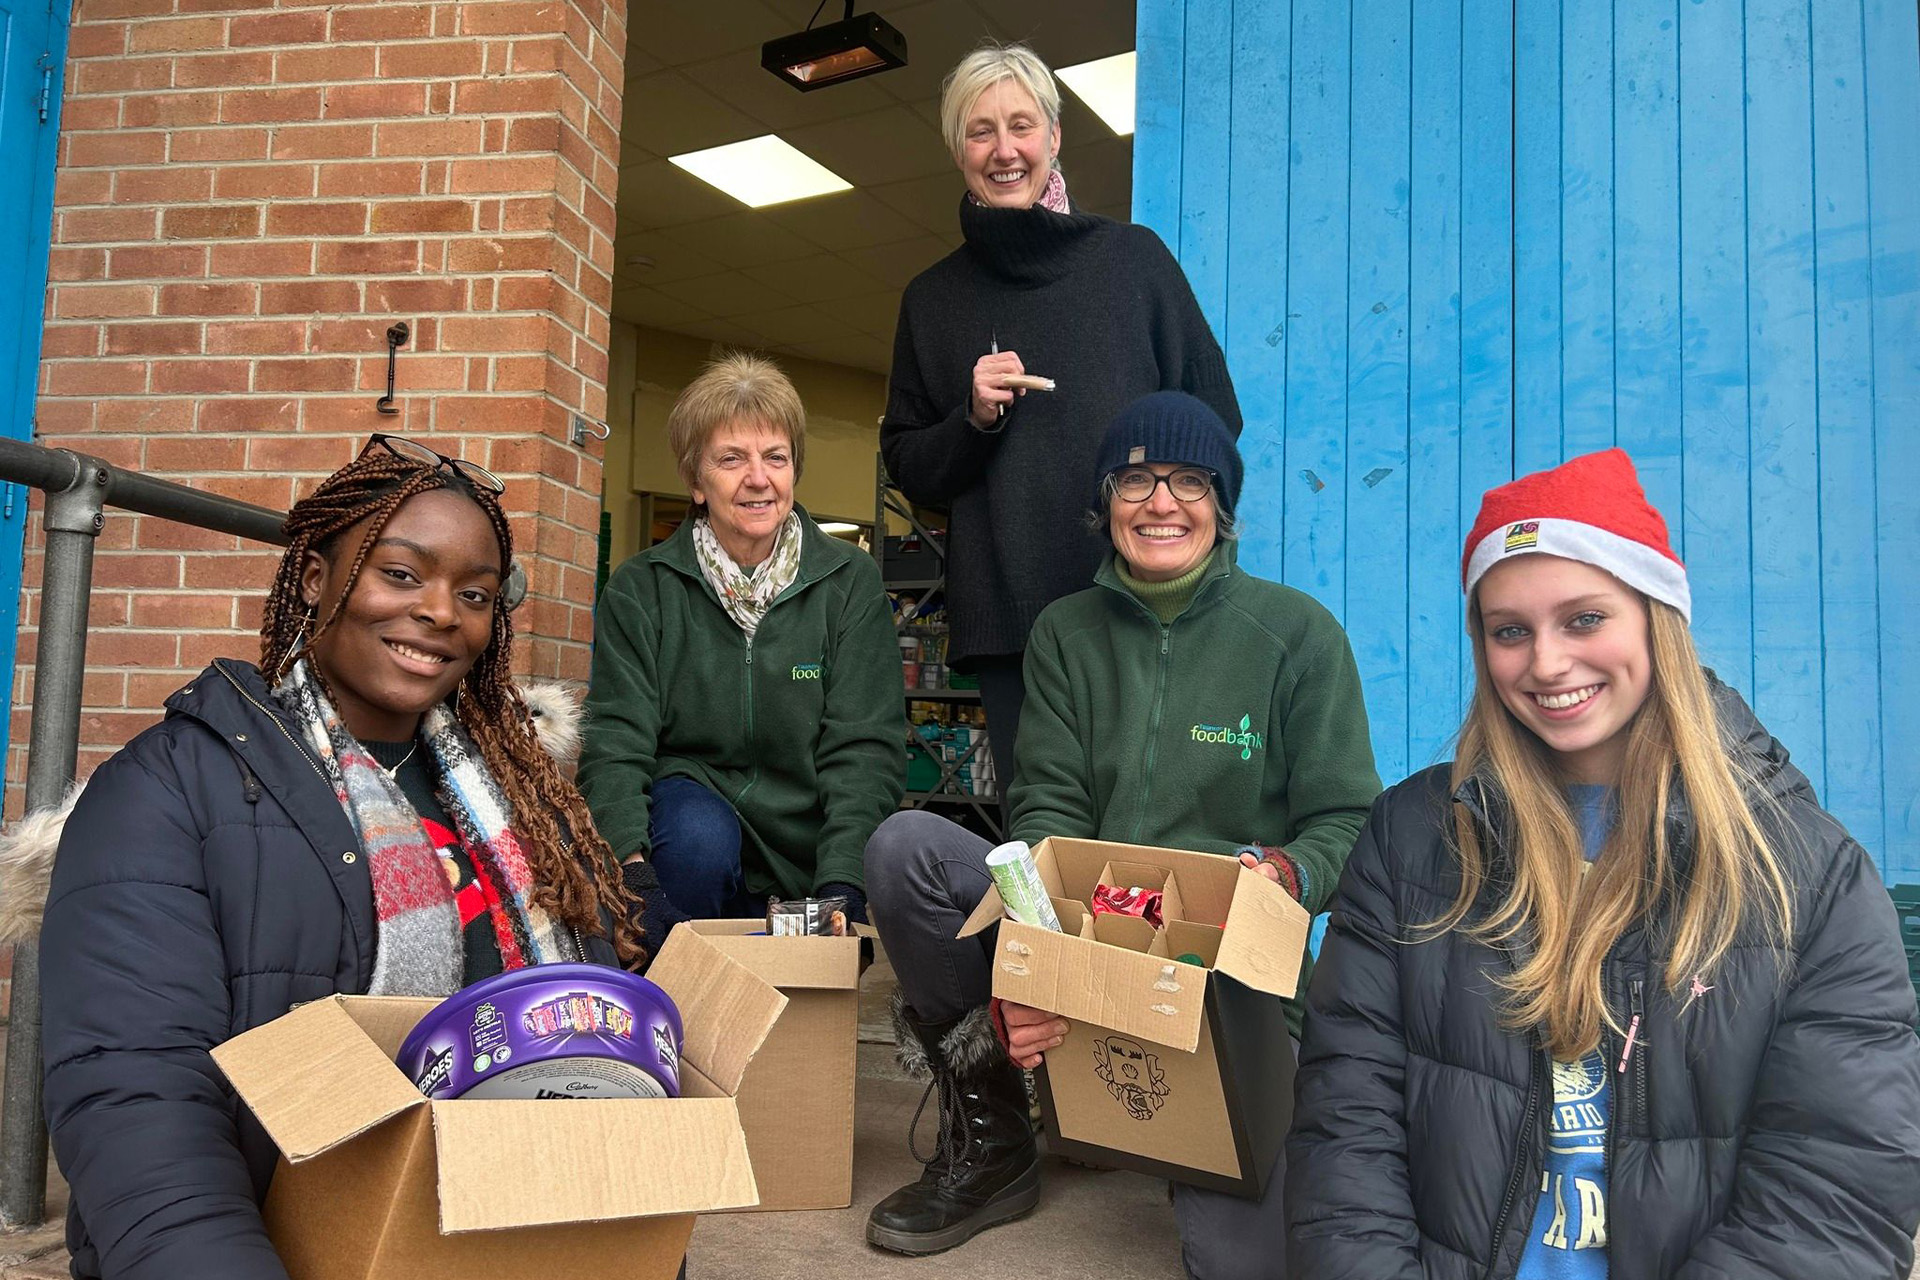 Queen's College Deliver Christmas Treats to Local Foodbank